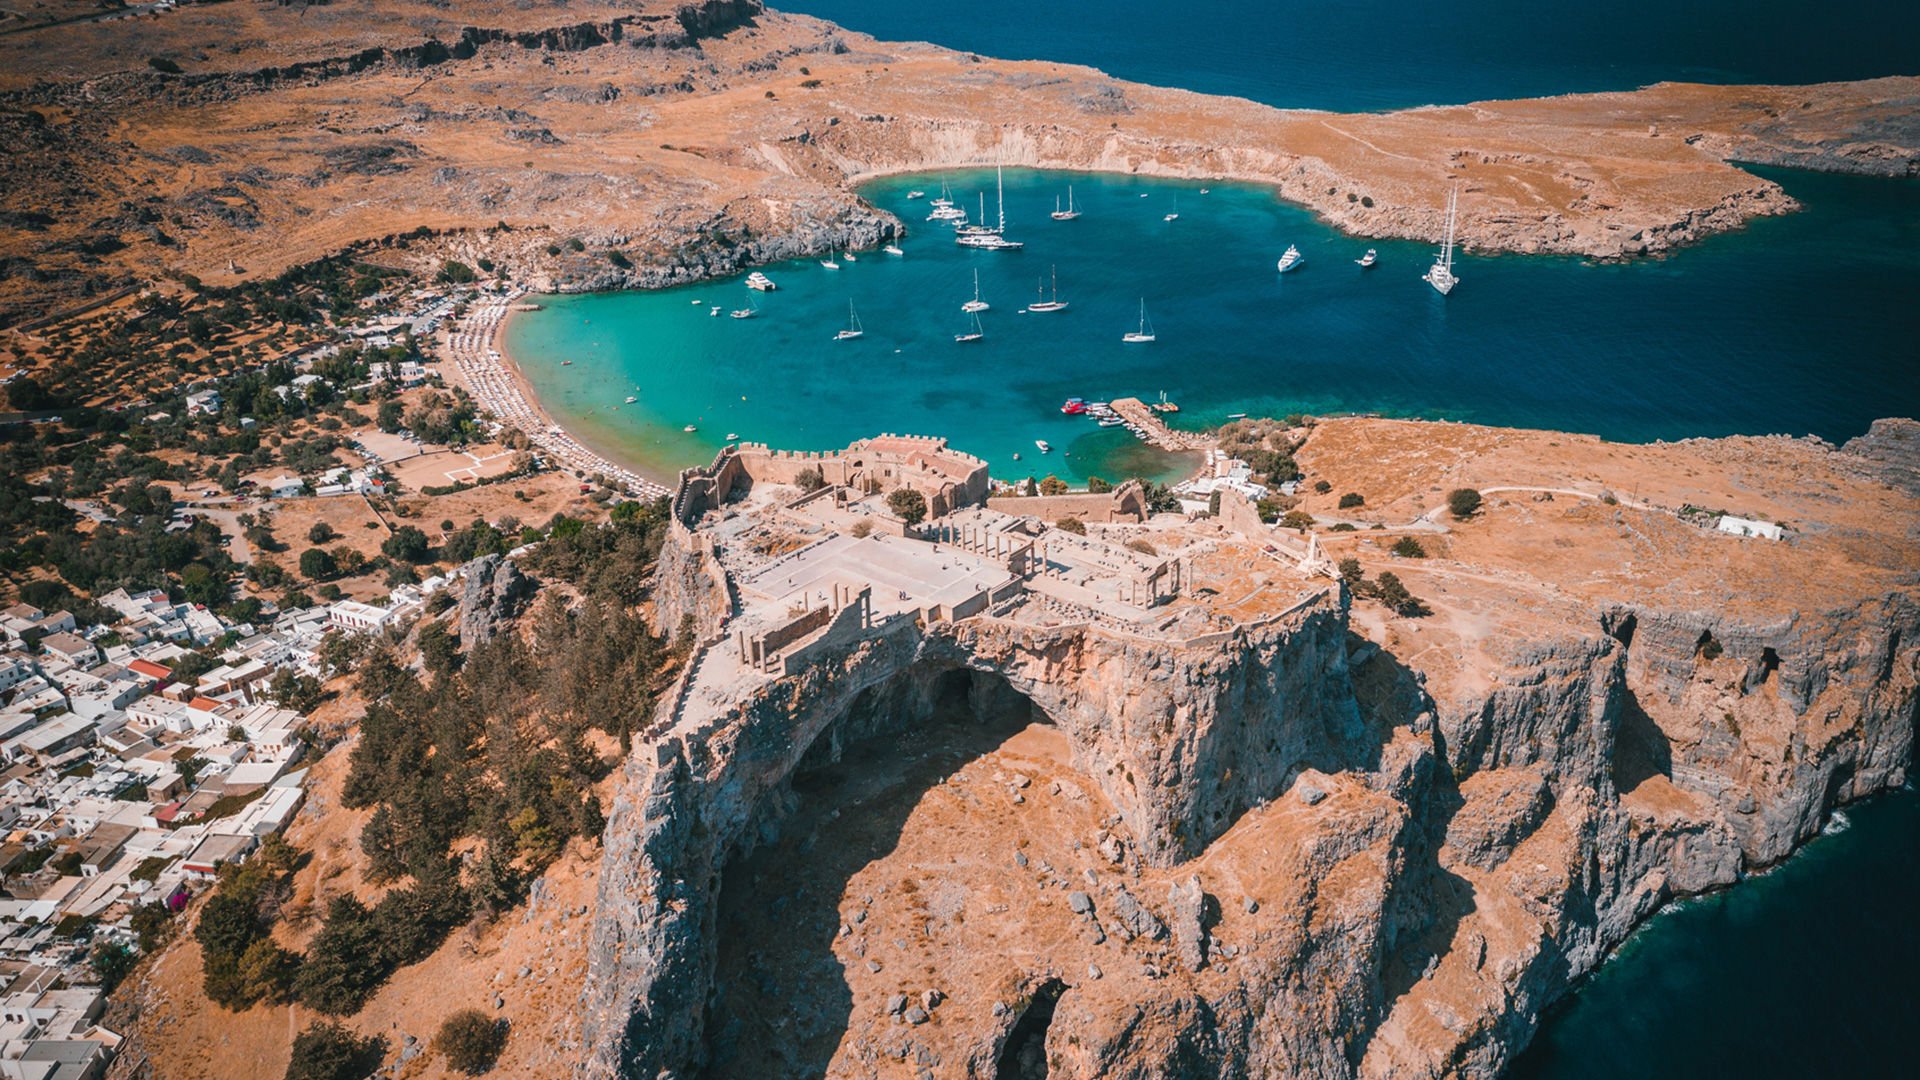 The Acropolis and the beach of Lindos